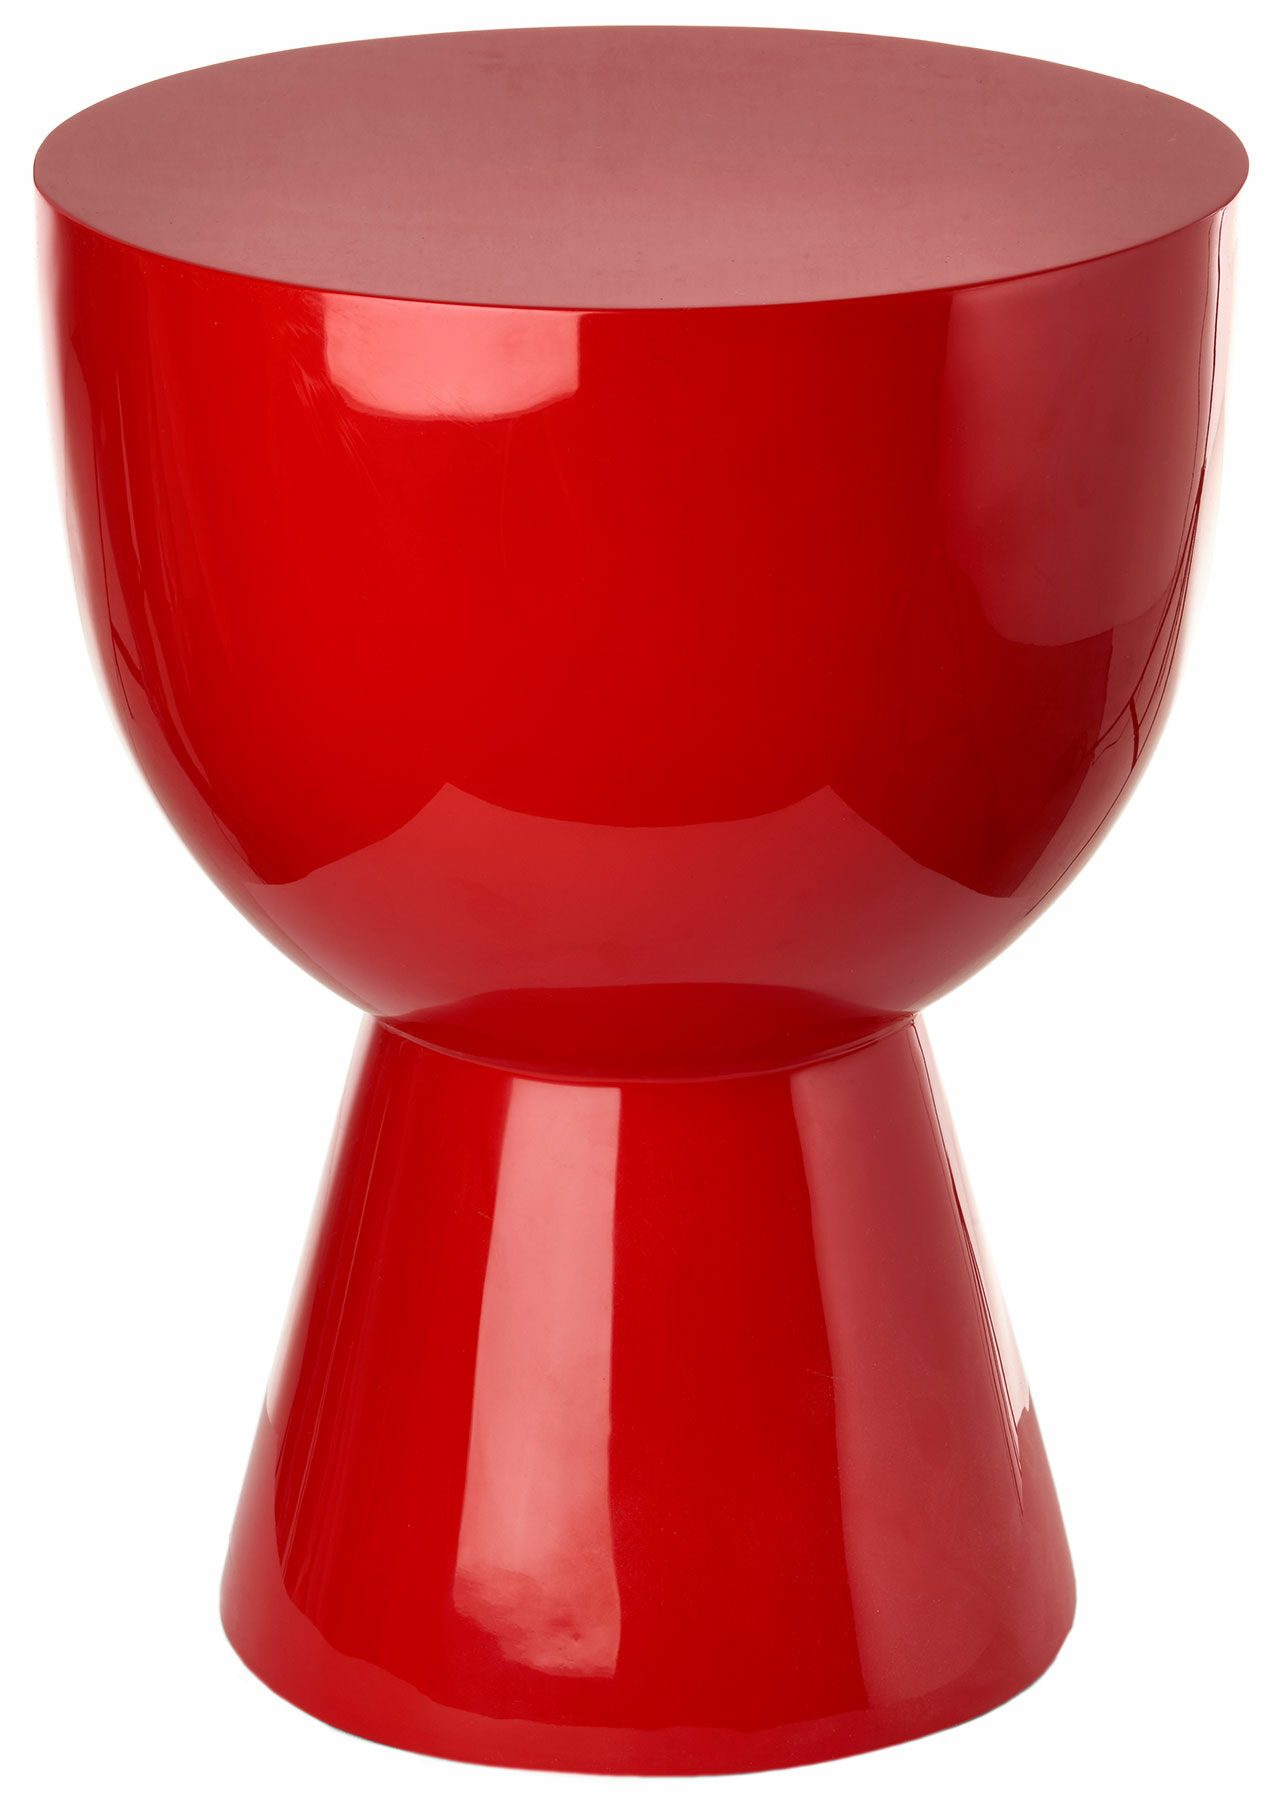 Stool / side table "Tip Tap Red" by Pols Potten